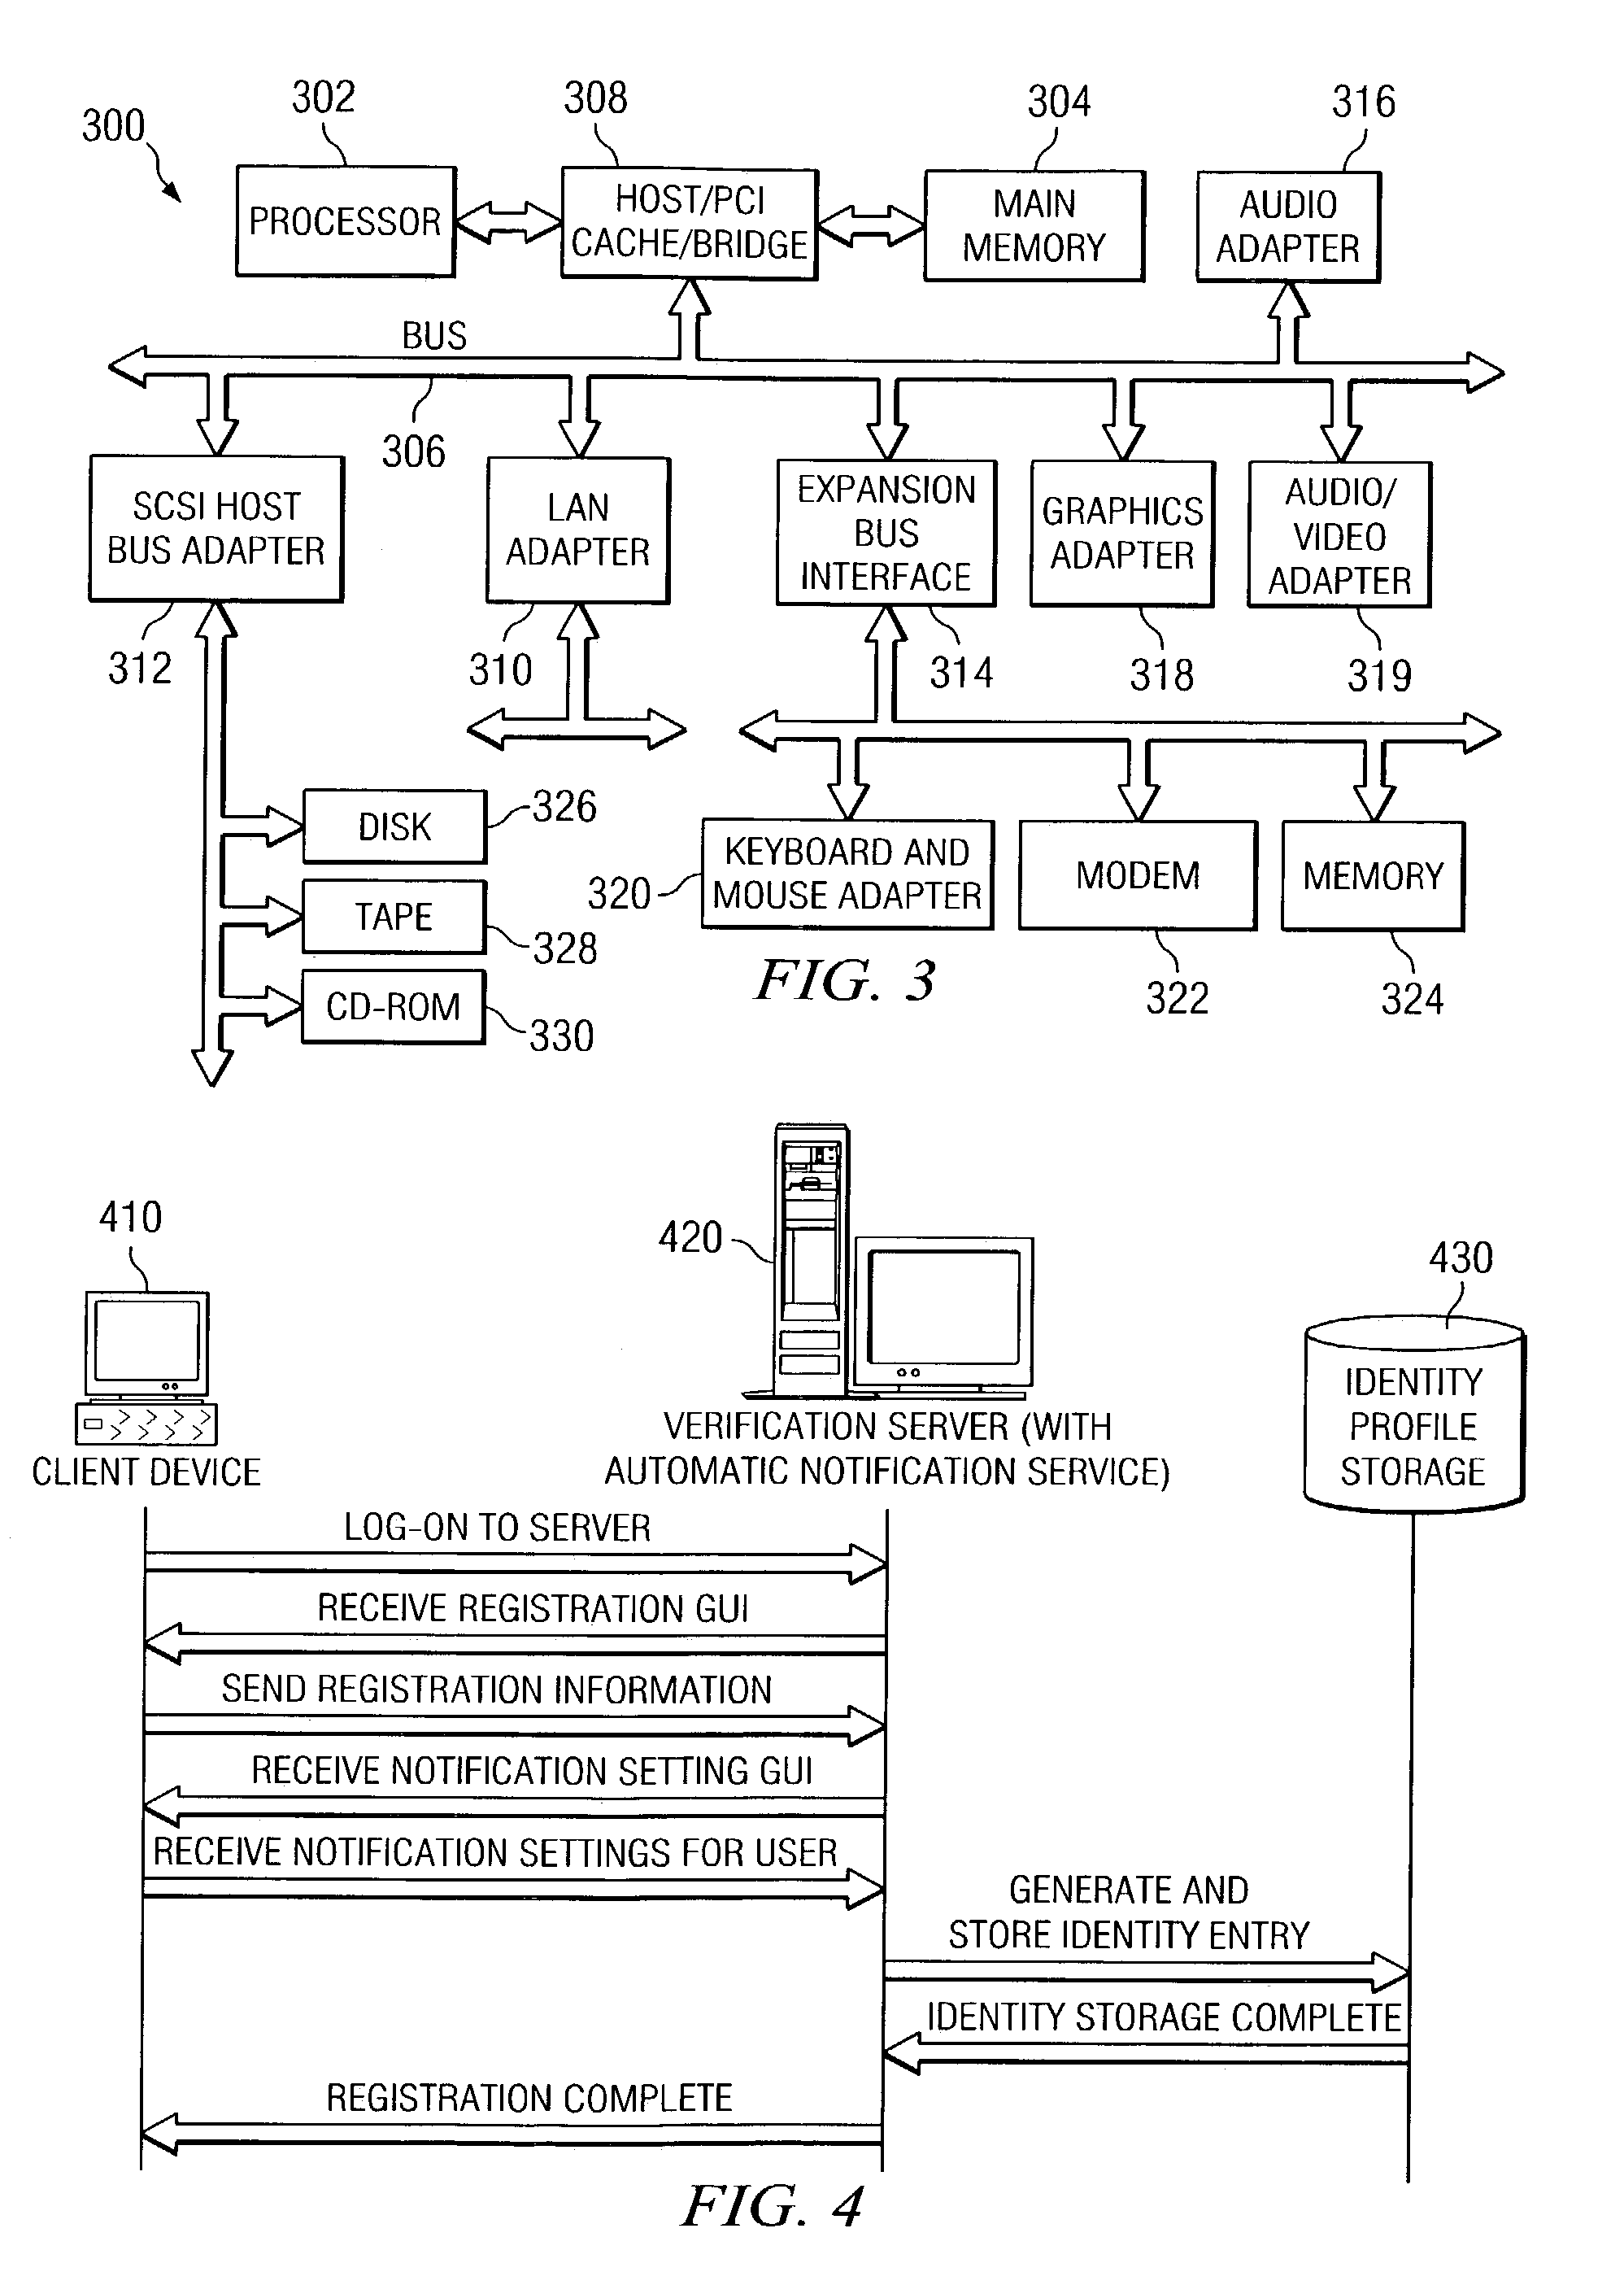 System and method for early detection and prevention of identity theft